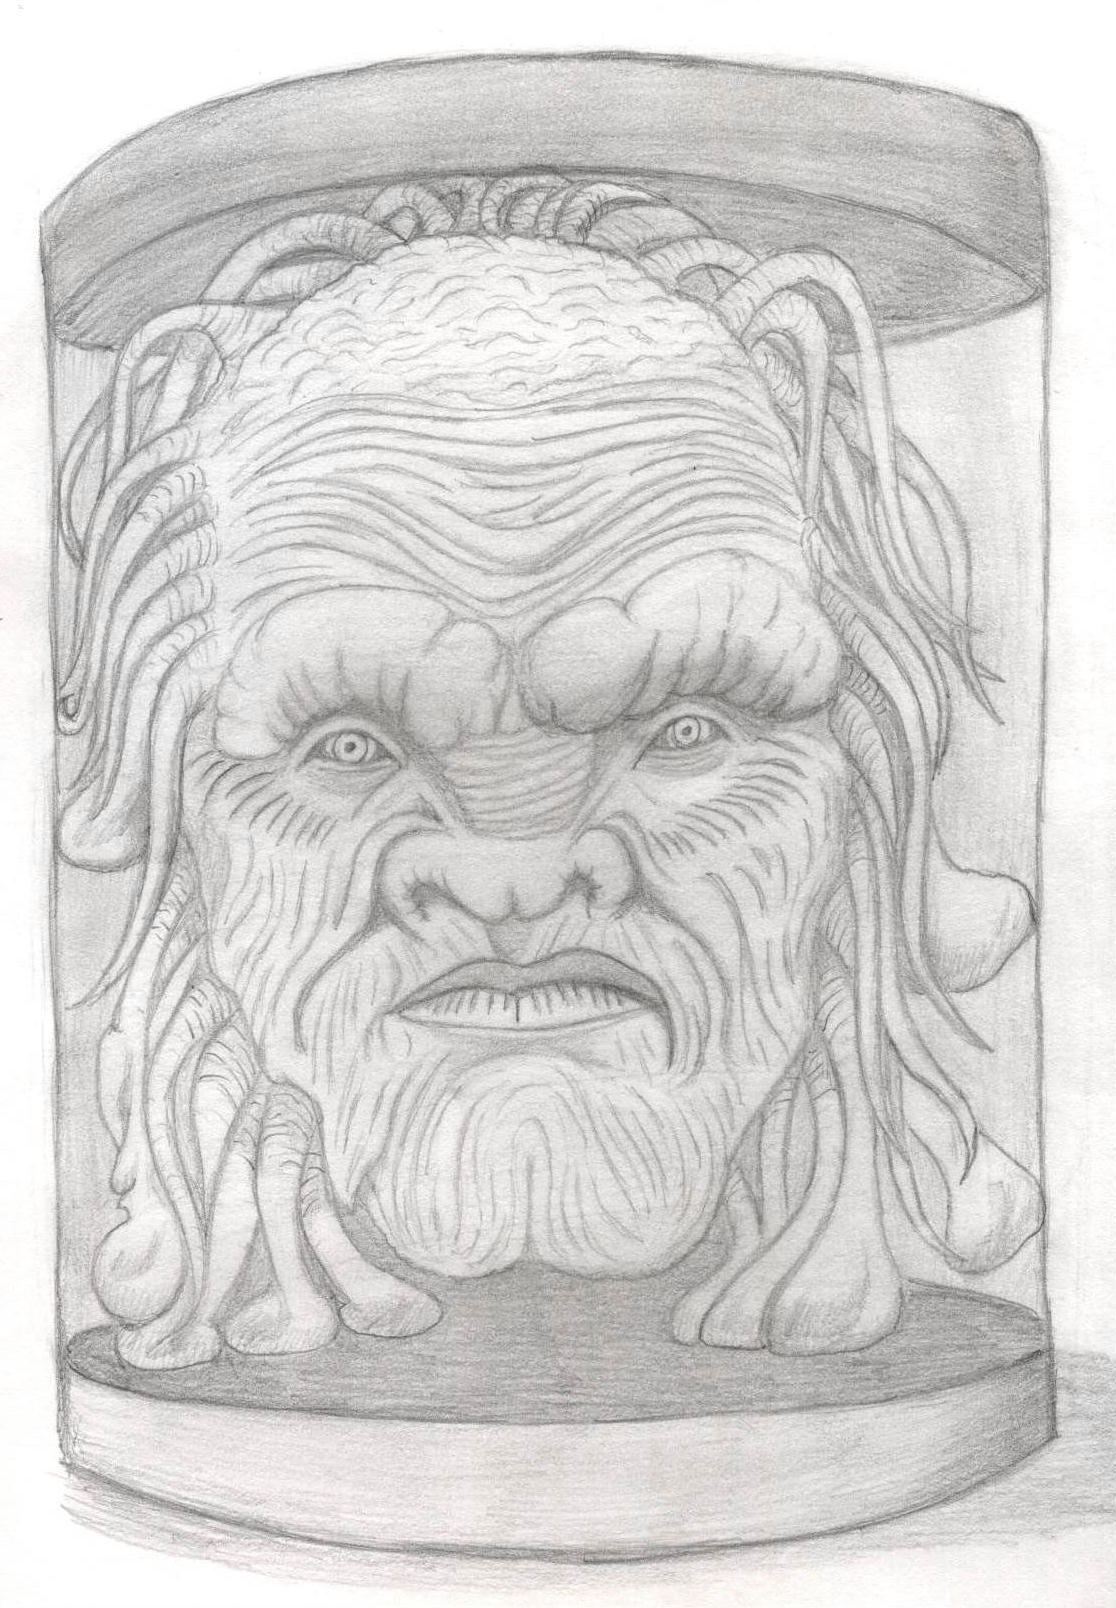 The Face Of Boe by Ran_The_Hyena